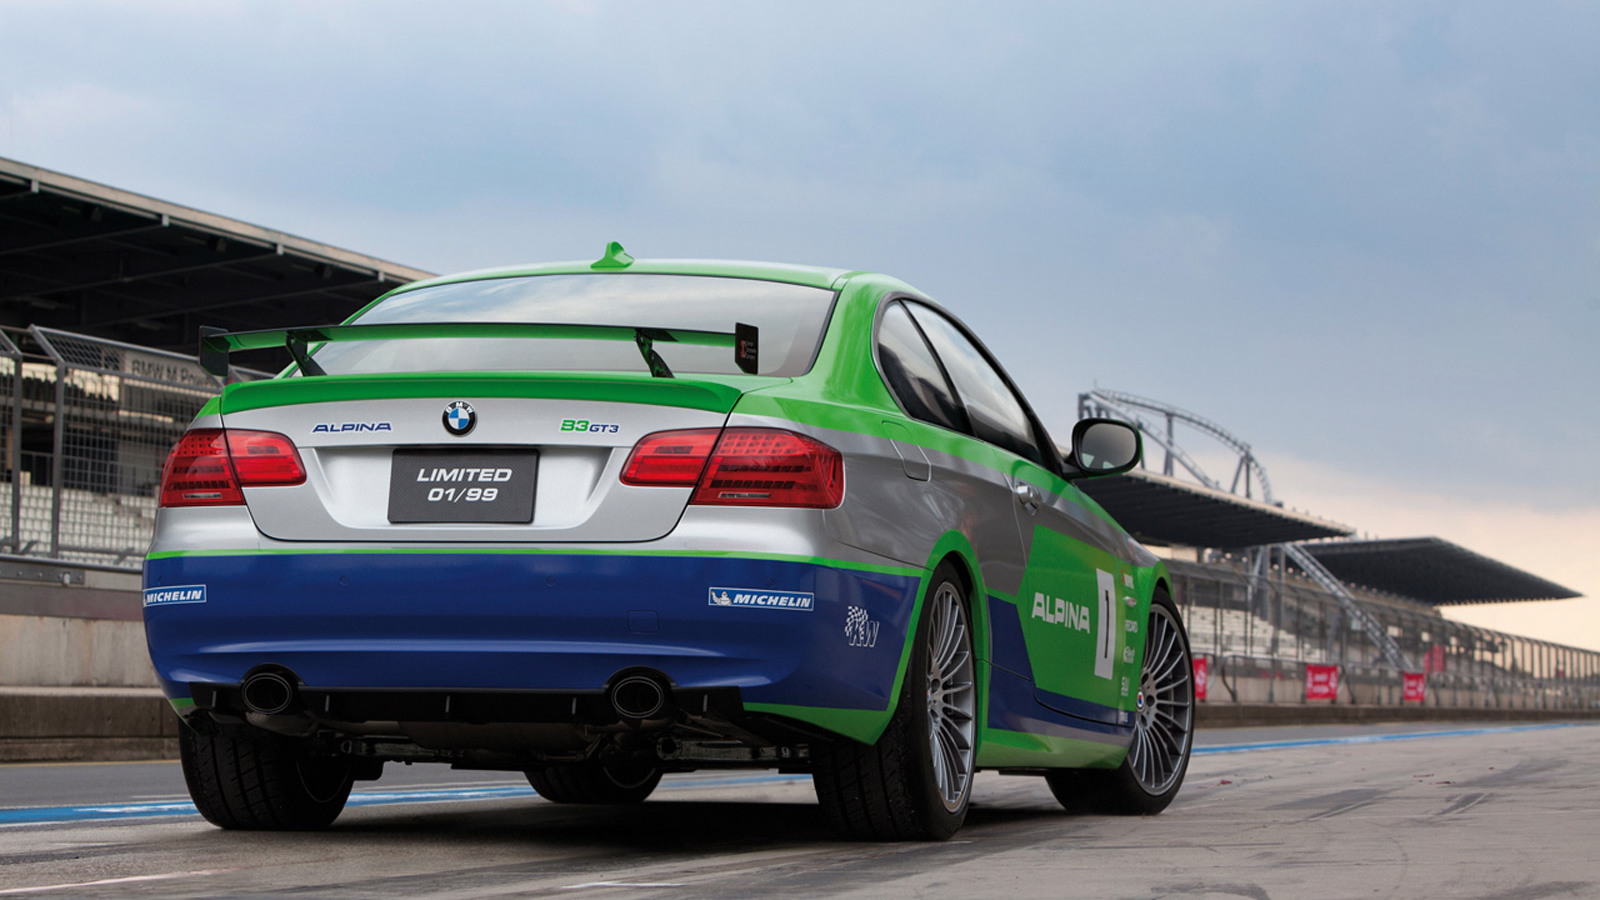 Alpina B3 GT3 based on the BMW 3-Series Coupe